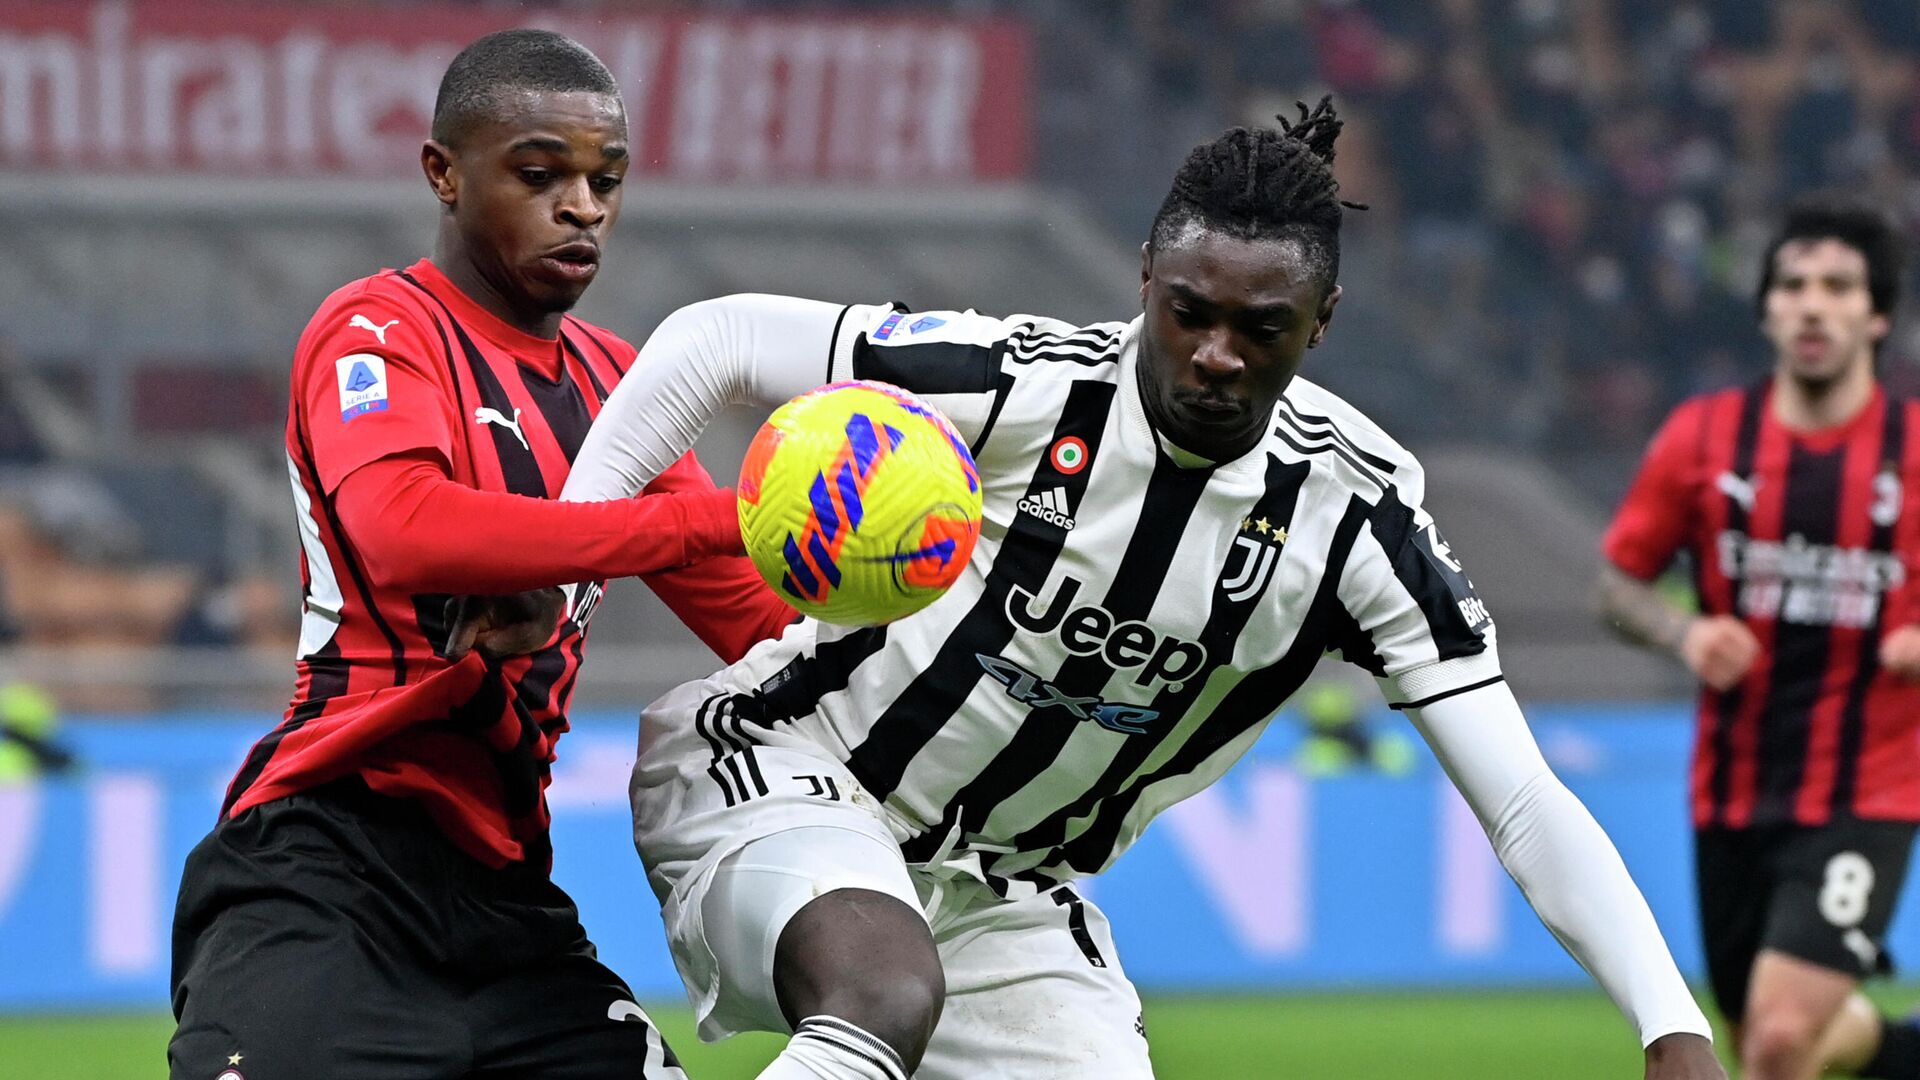 AC Milan's French defender Pierre Kalulu (L) and Juventus' Italian forward Moise Kean go for the ball during the Italian Serie A football match between AC Milan and Juventus on January 23, 2022 at the San Siro stadium in Milan. (Photo by Alberto PIZZOLI / AFP) - РИА Новости, 1920, 24.01.2022